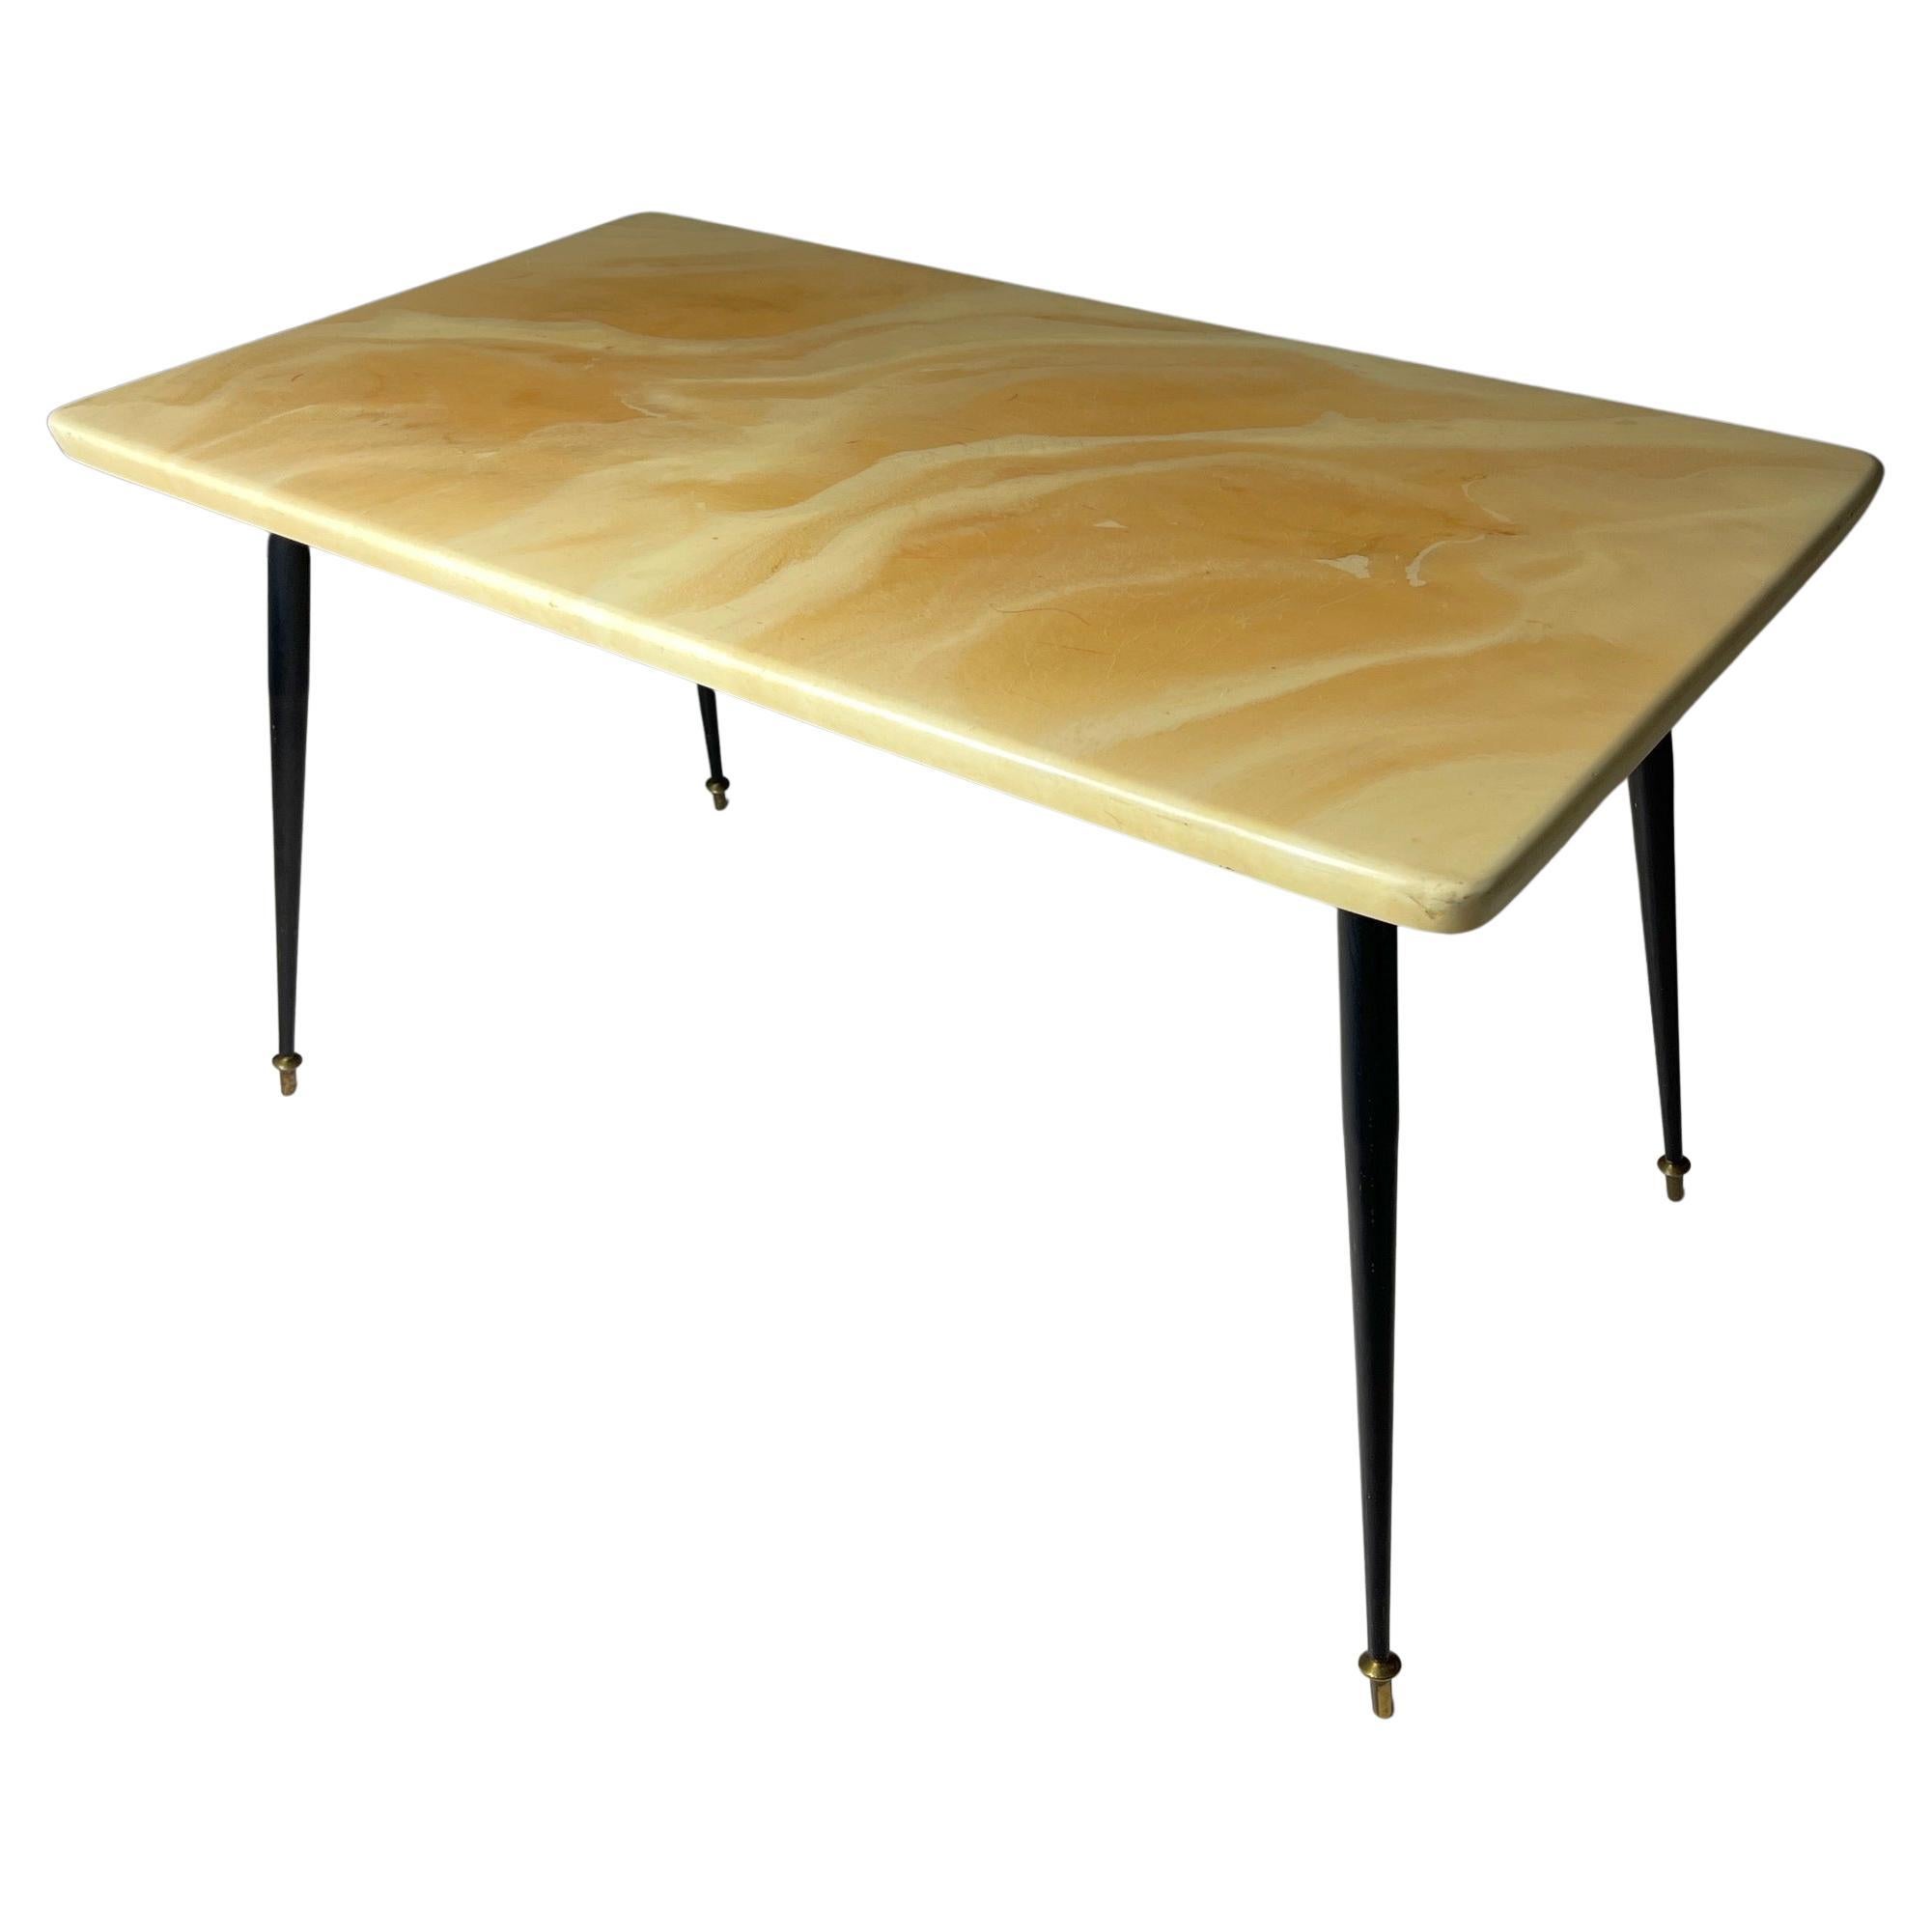 Midcentury Beige Coffee Table, Italy, 1950s For Sale